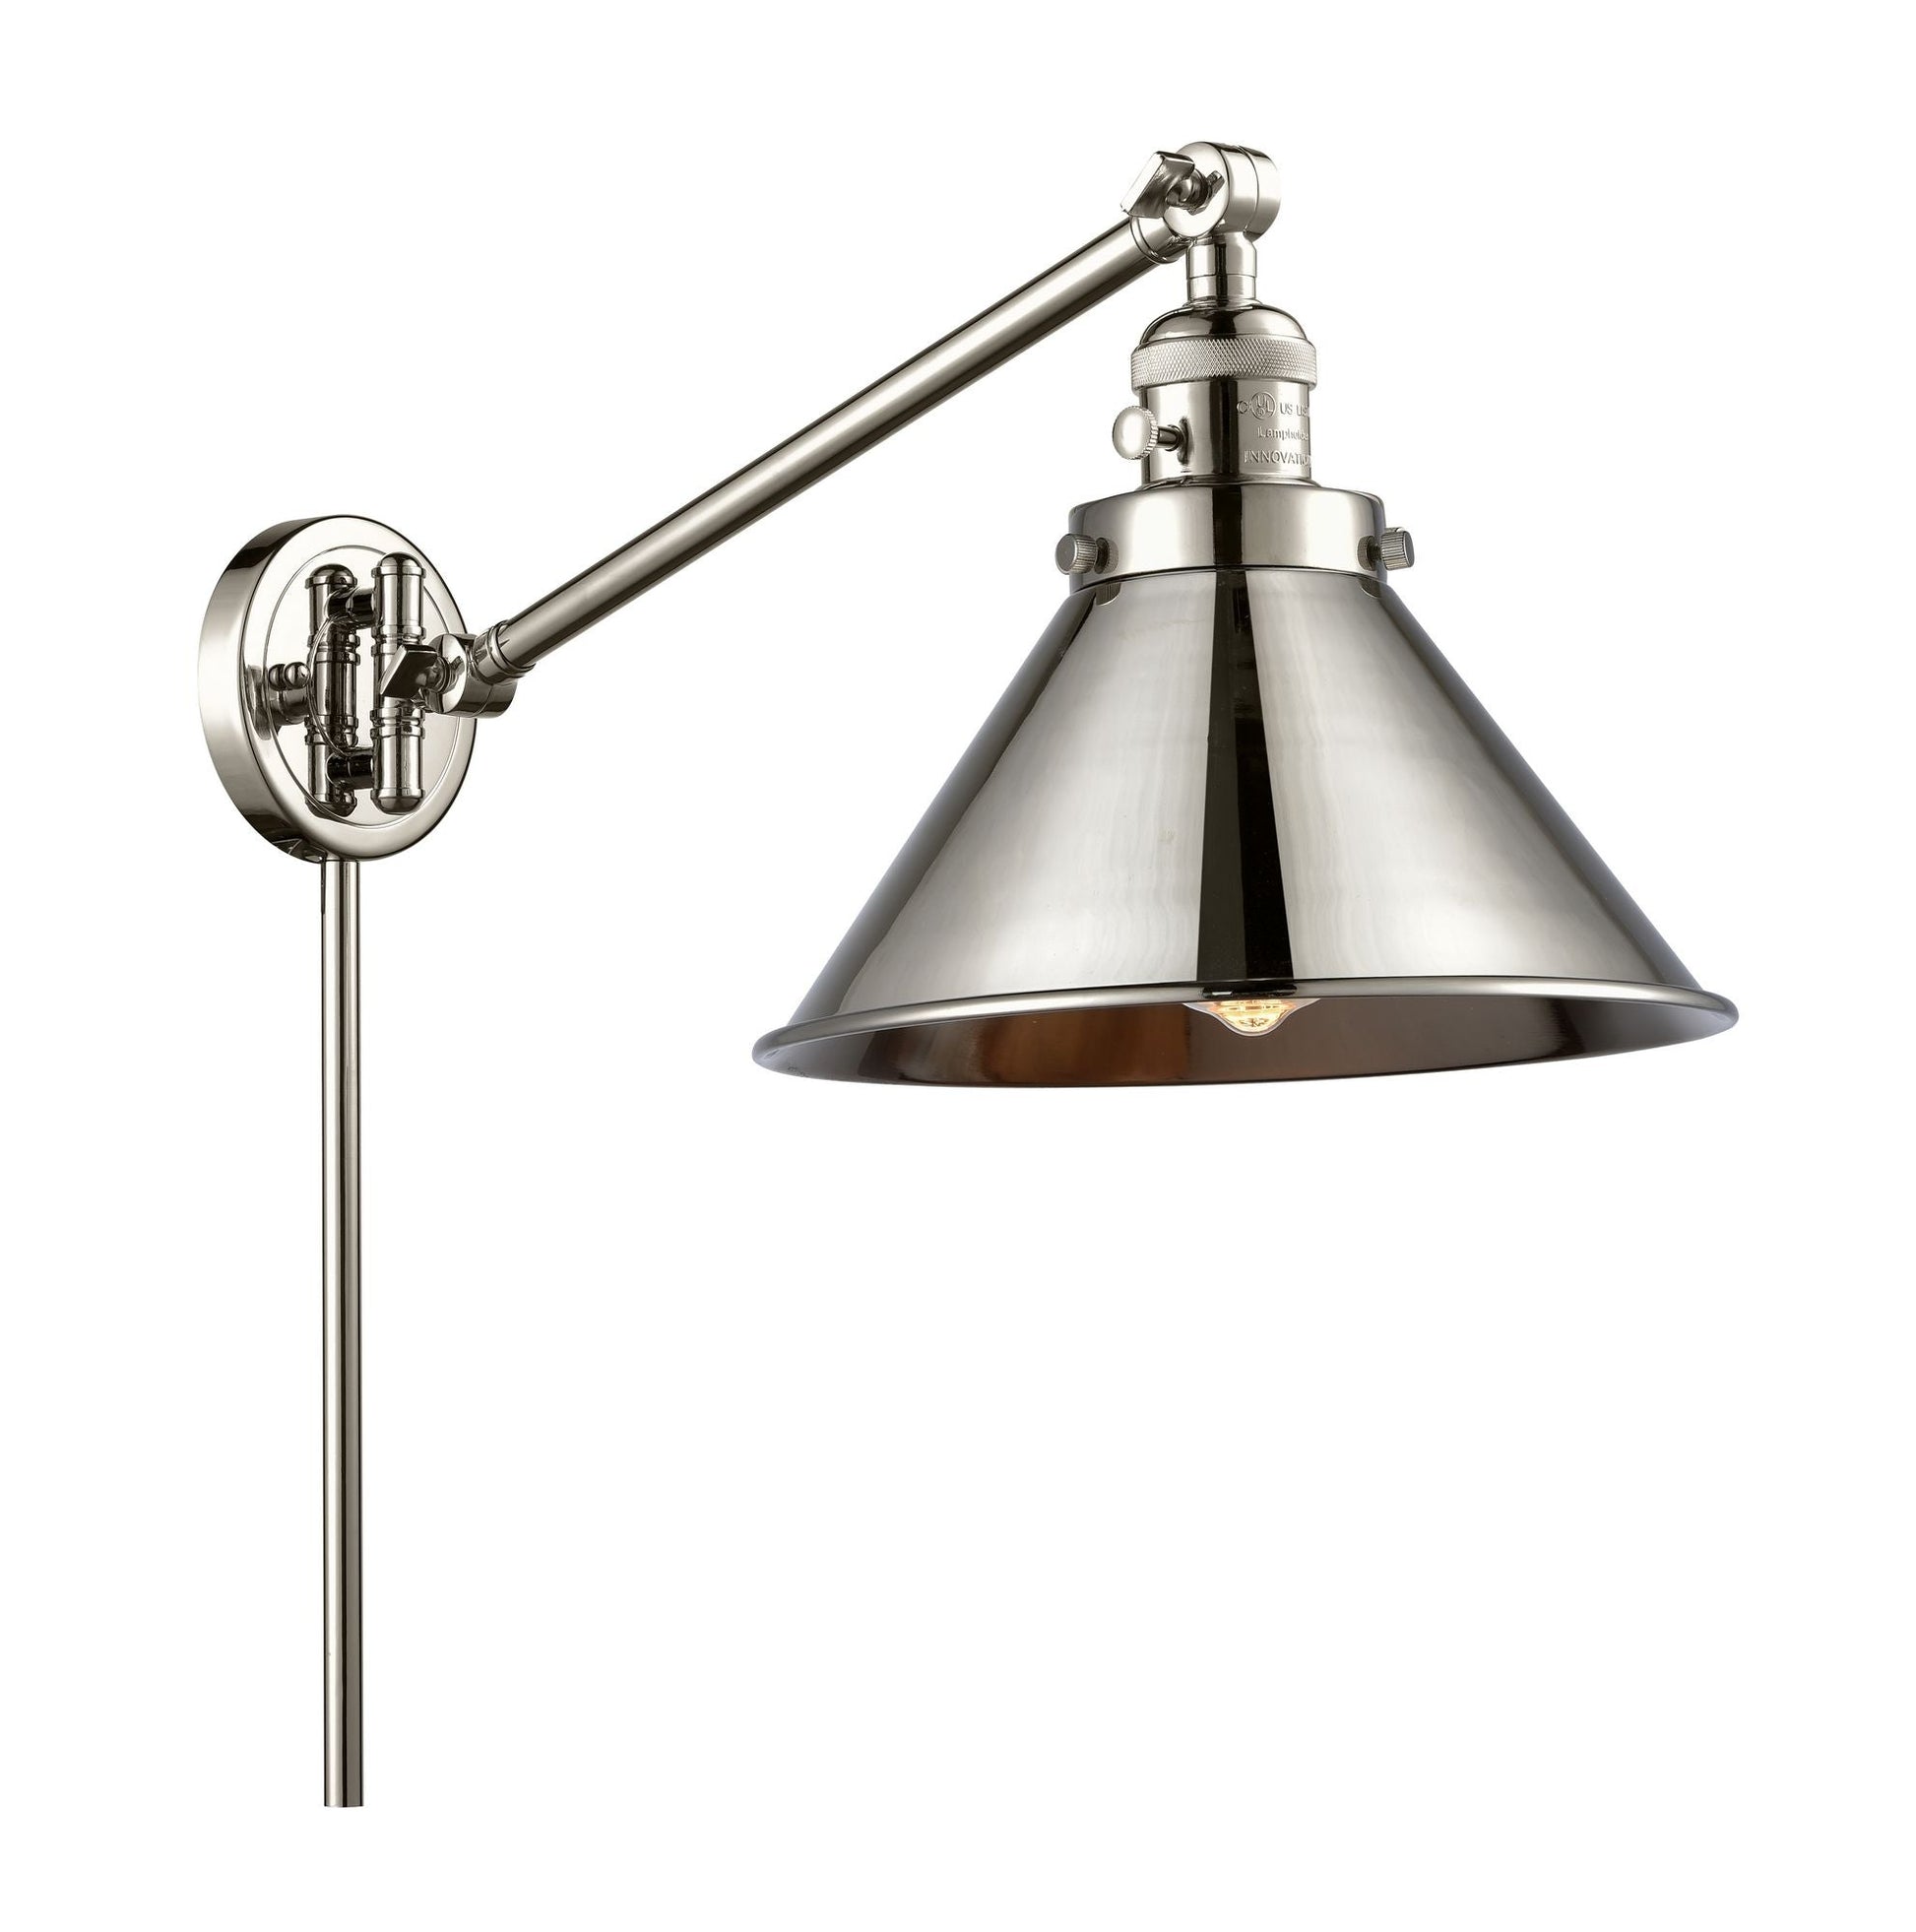 1-Light 10" Polished Nickel Swing Arm - Polished Nickel Briarcliff Shade - Incandesent Or LED Bulbs